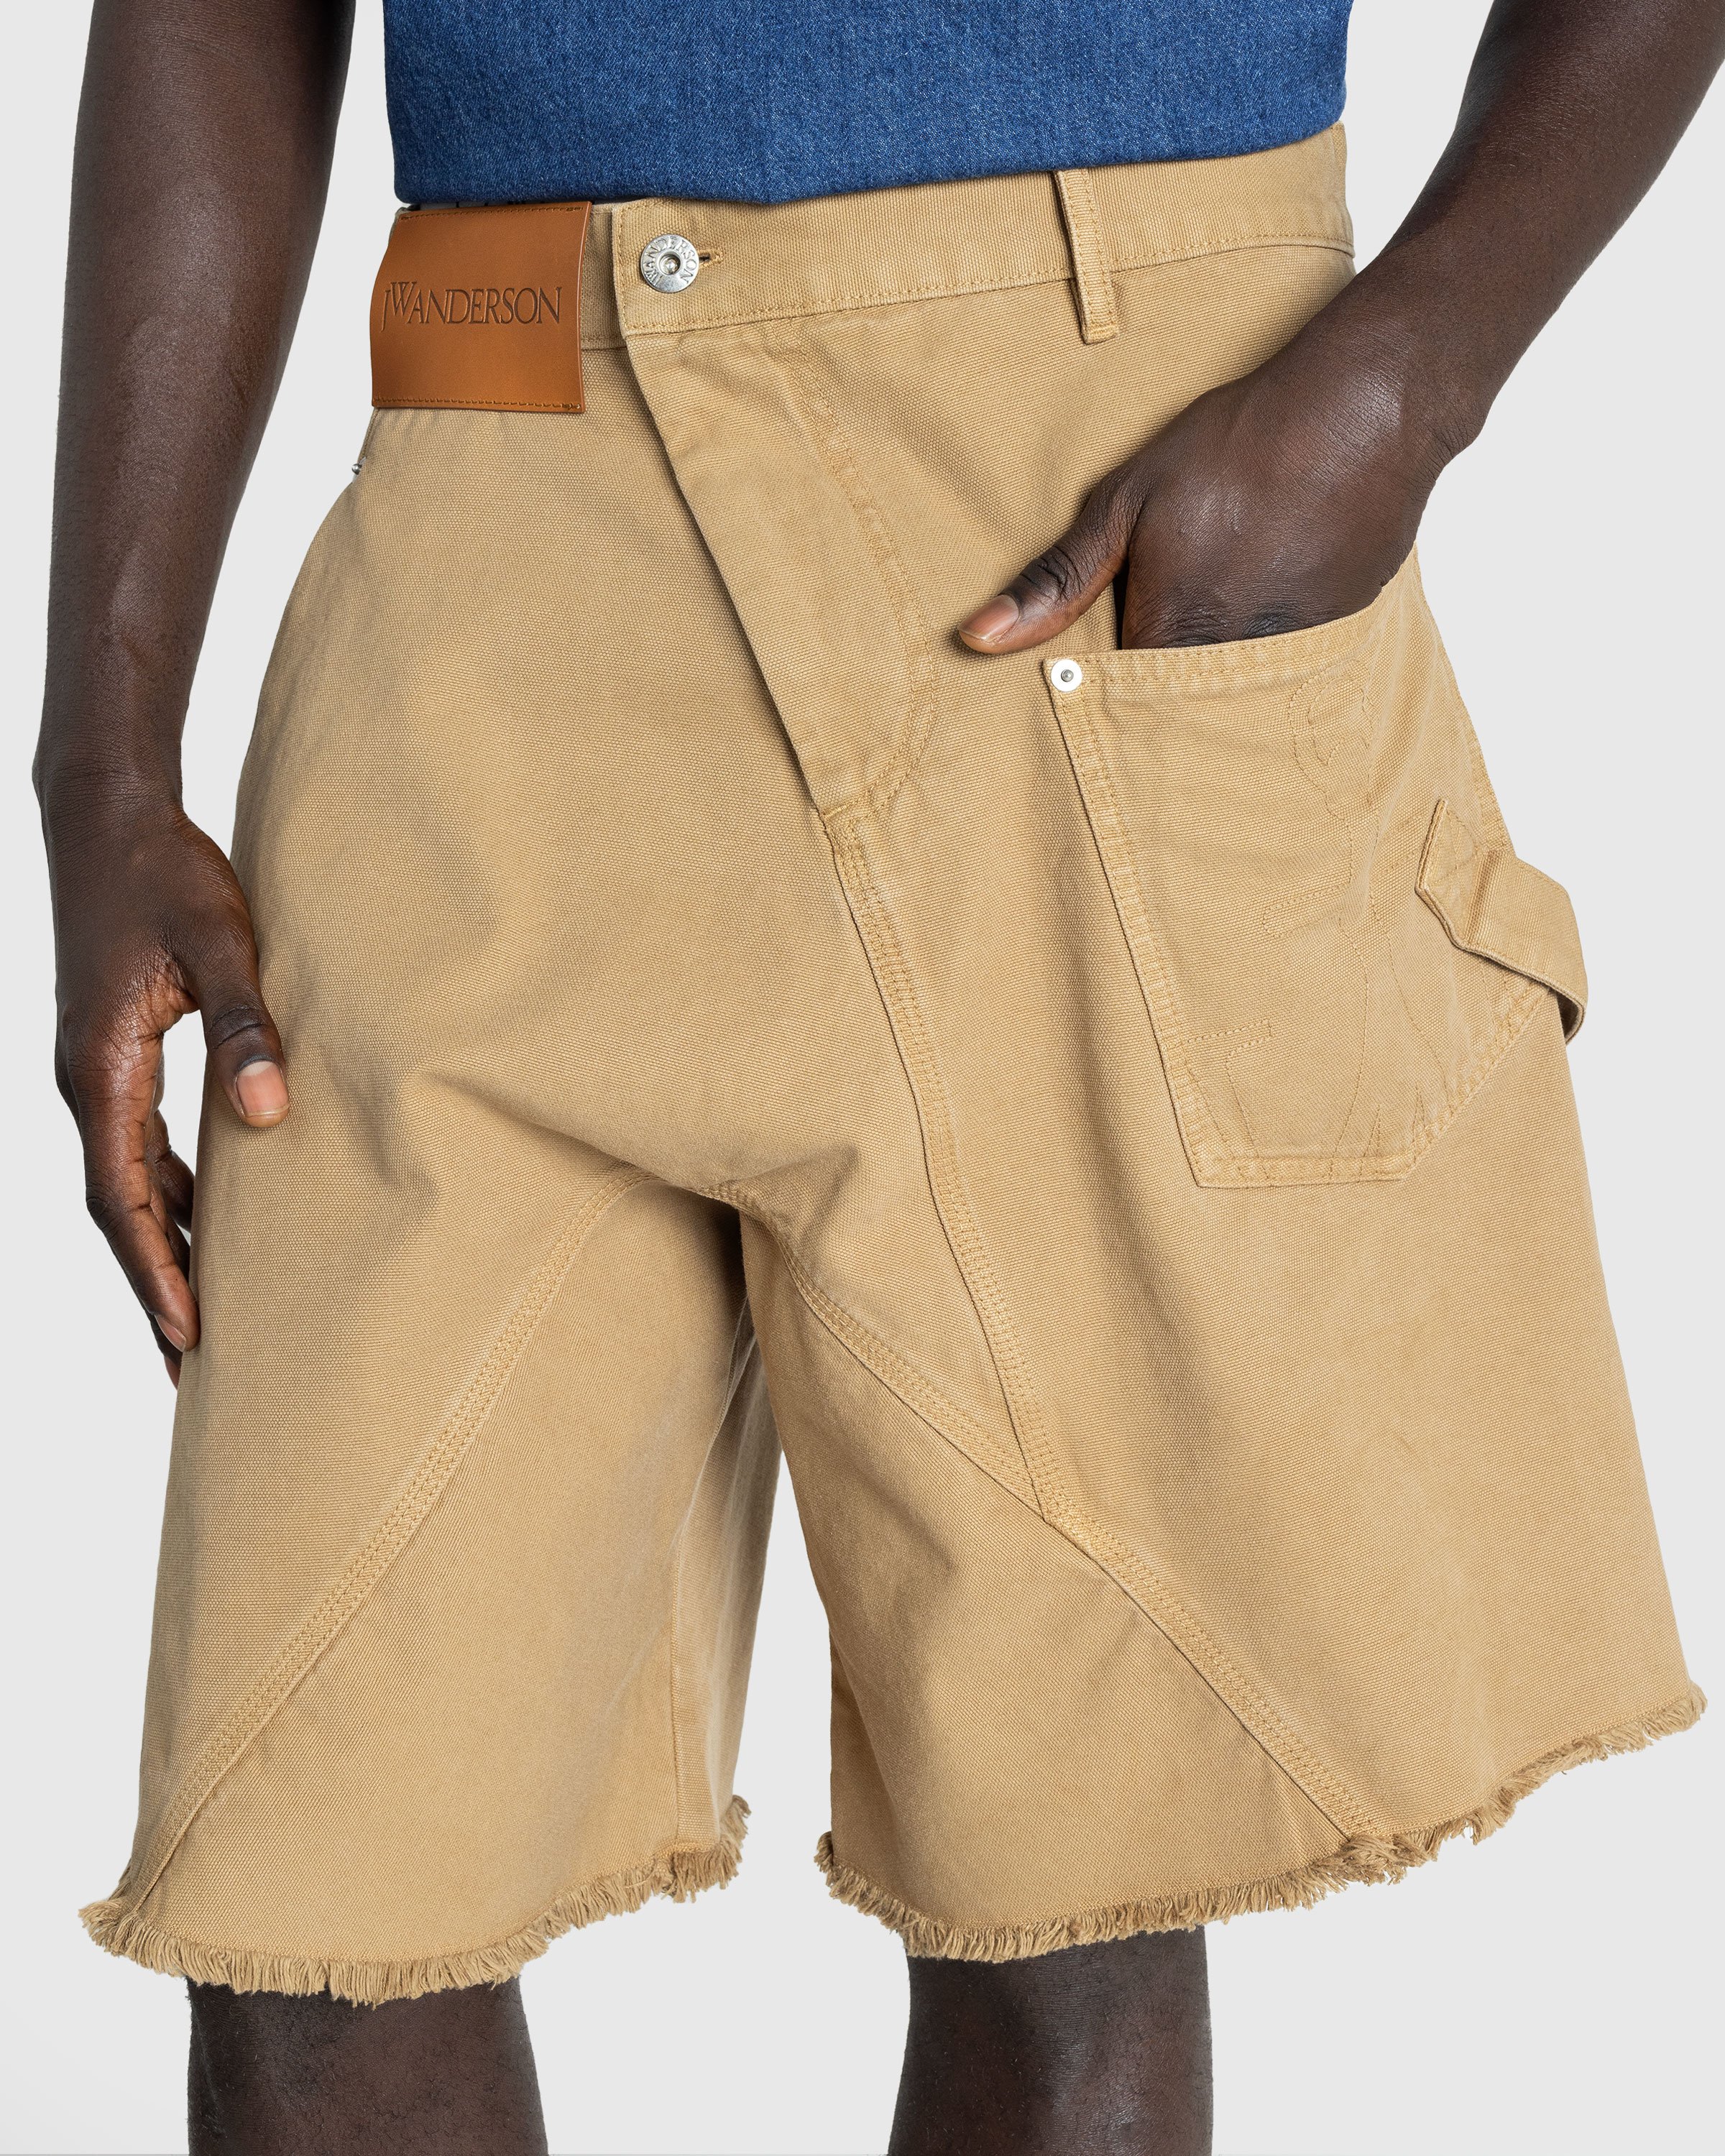 J.W. Anderson - TWISTED WORKWEAR SHORTS - Clothing - Beige - Image 3